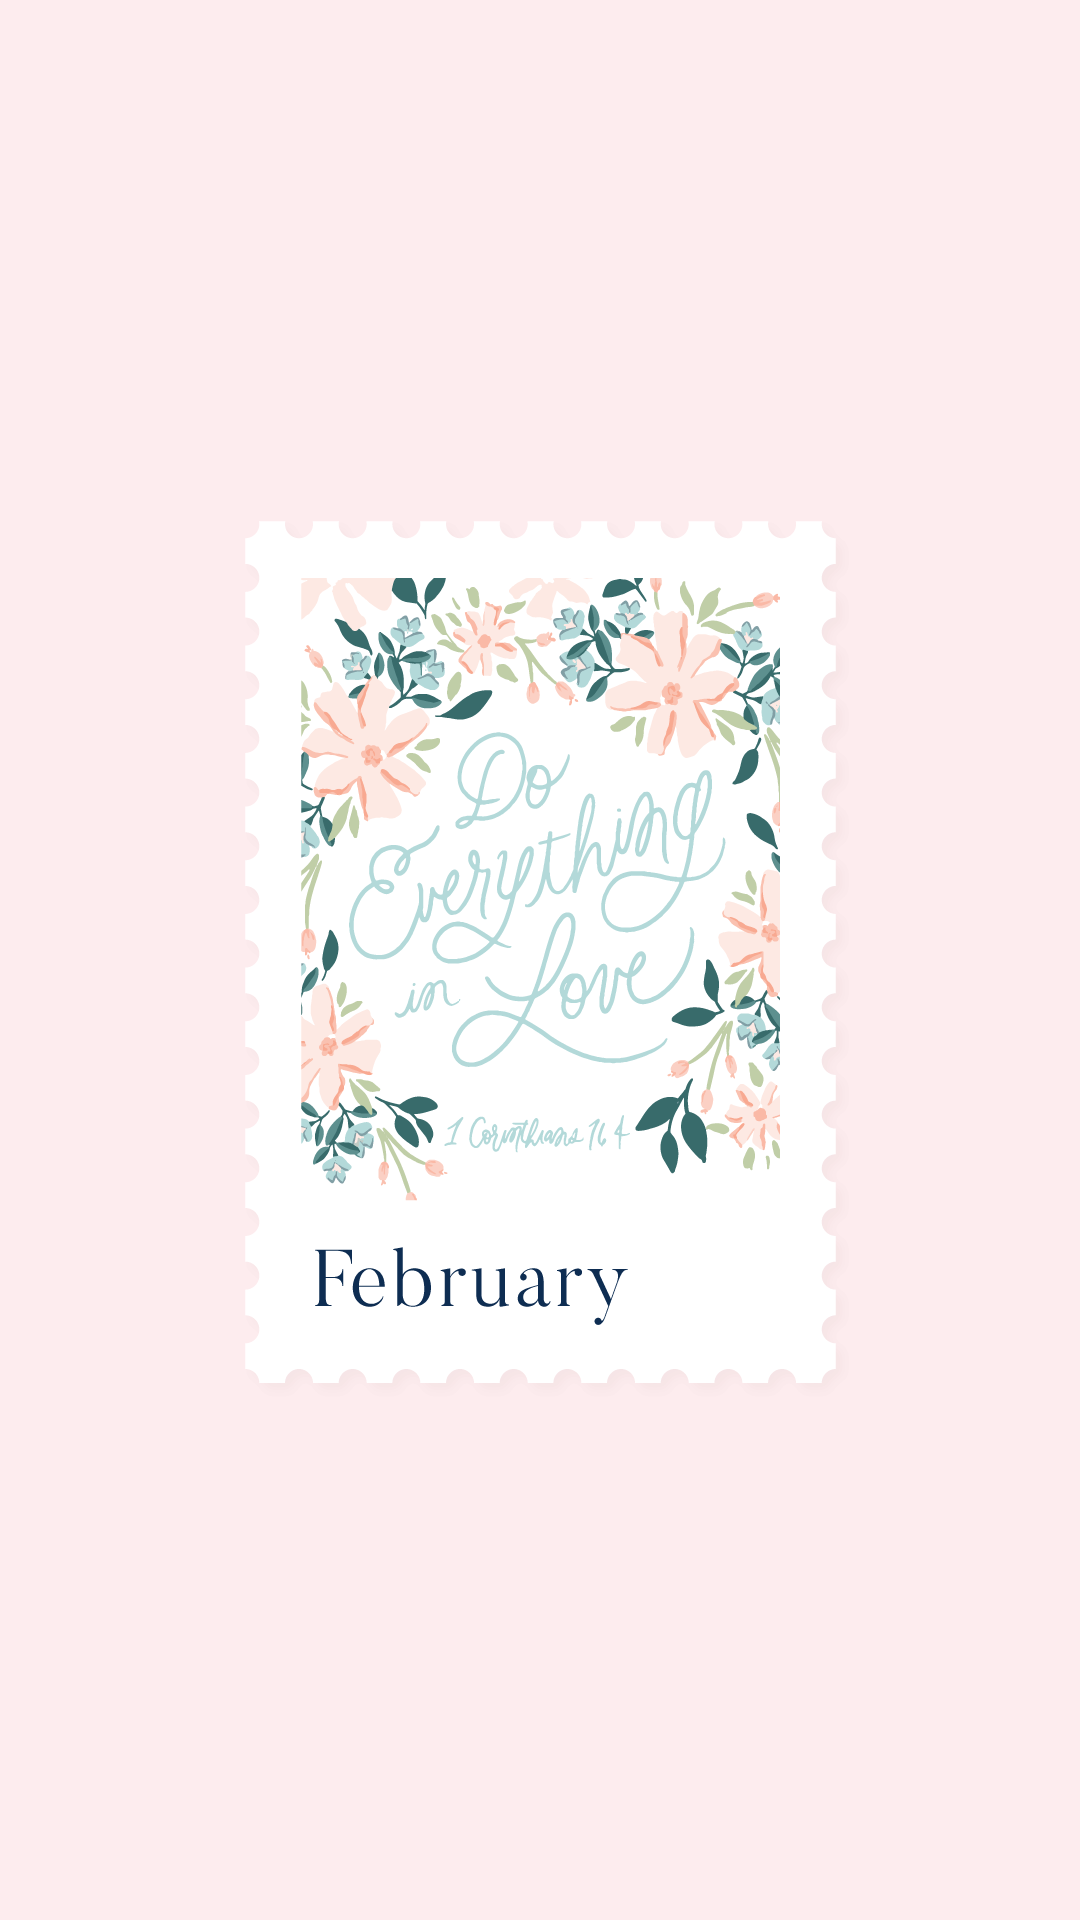 Free Downloadable Tech Backgrounds for February 2021  The Everygirl